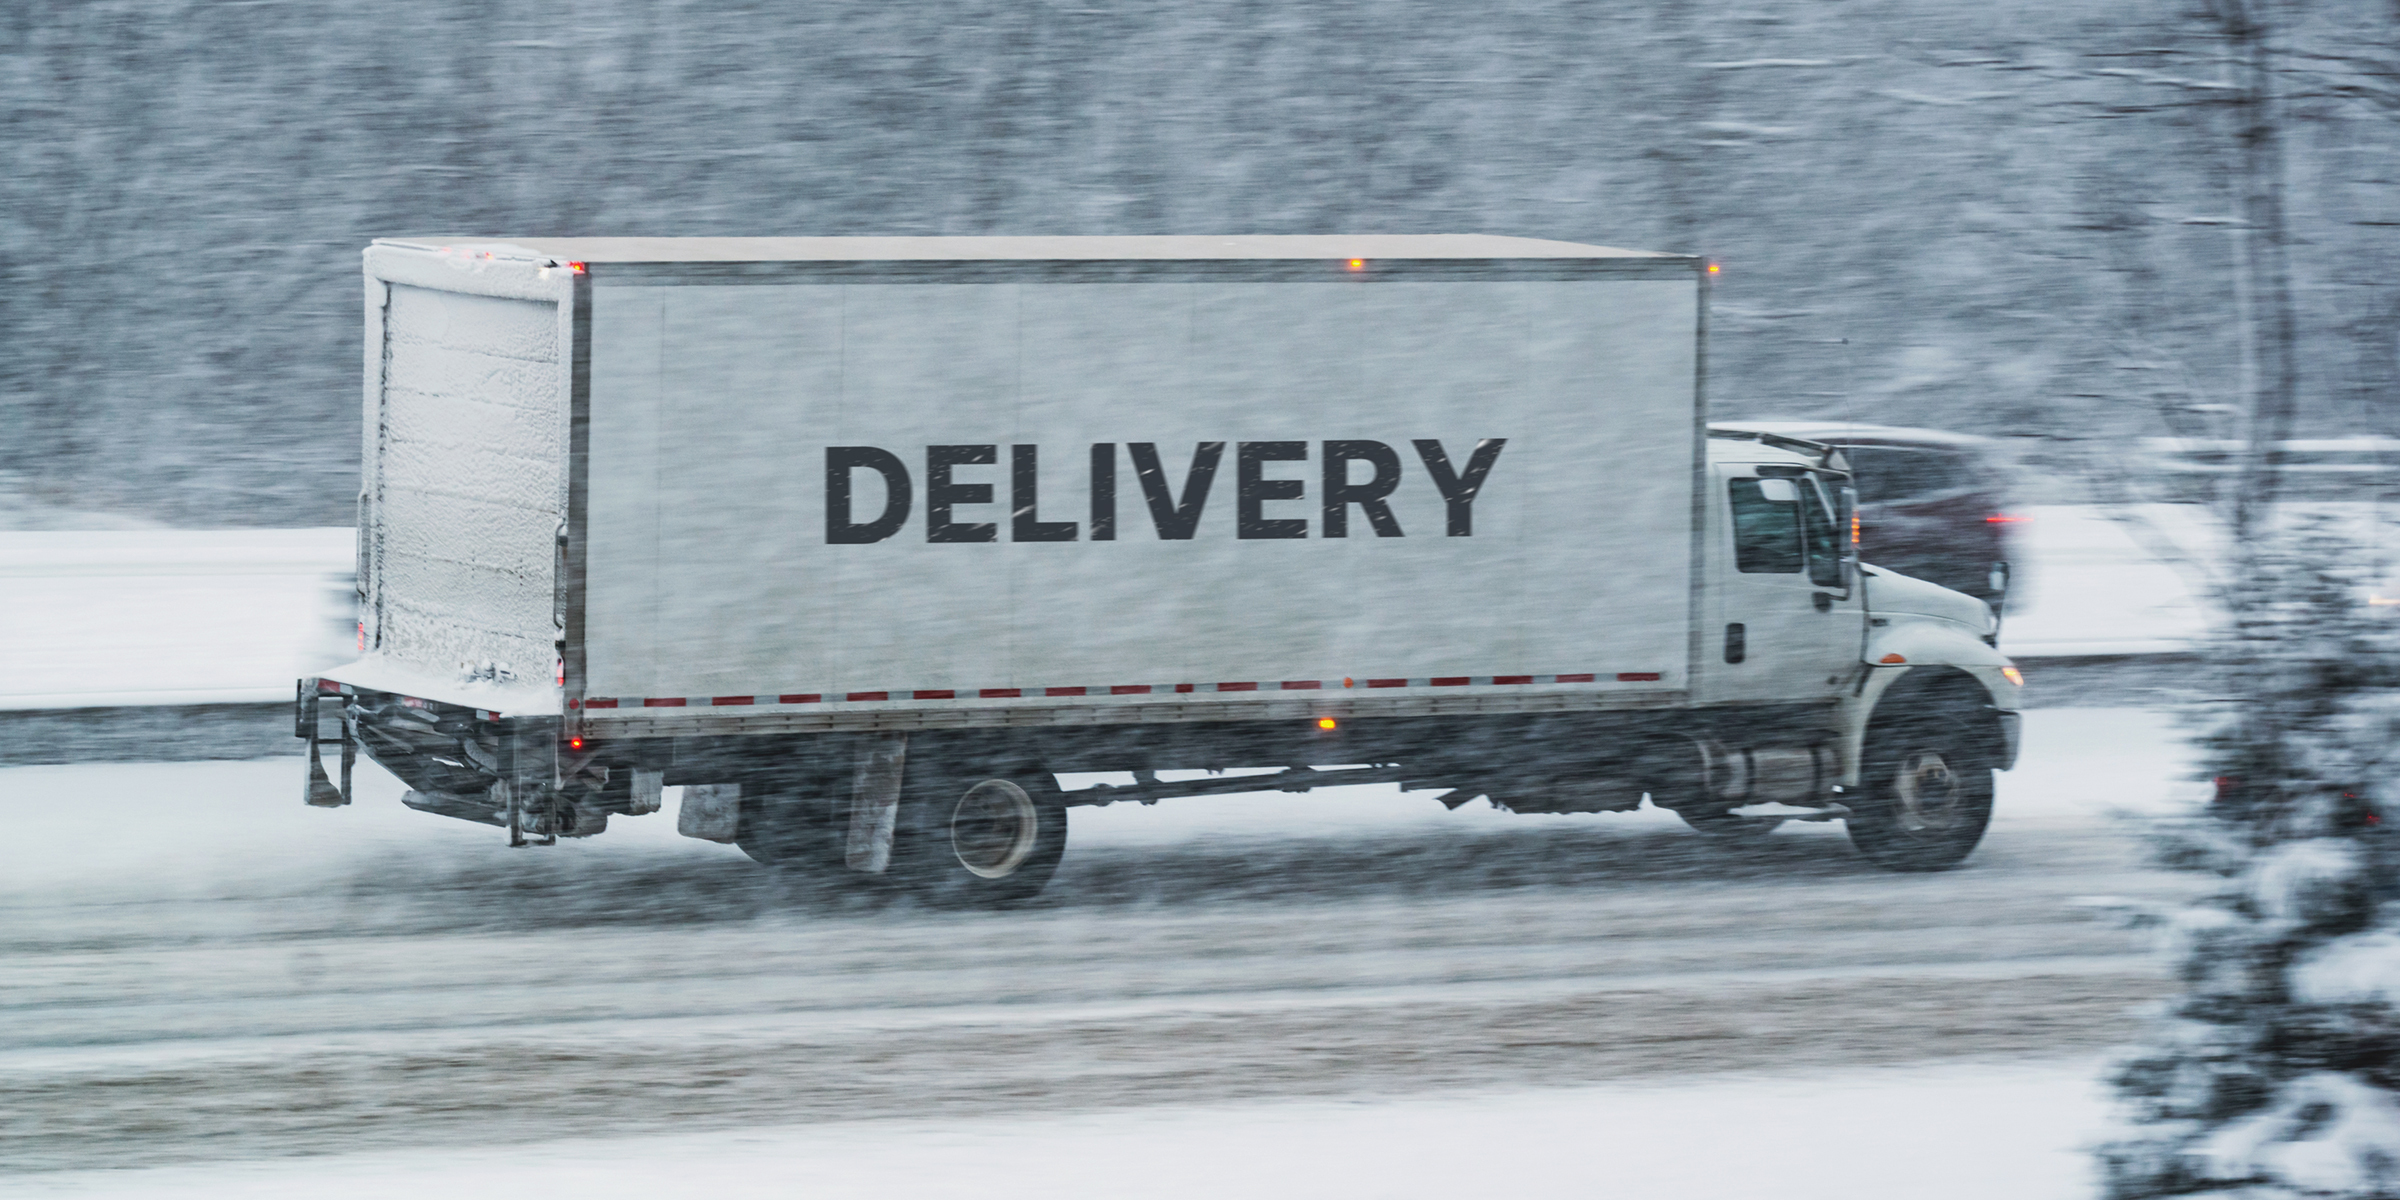 Delivery truck on a snowy road | Source: Shutterstock